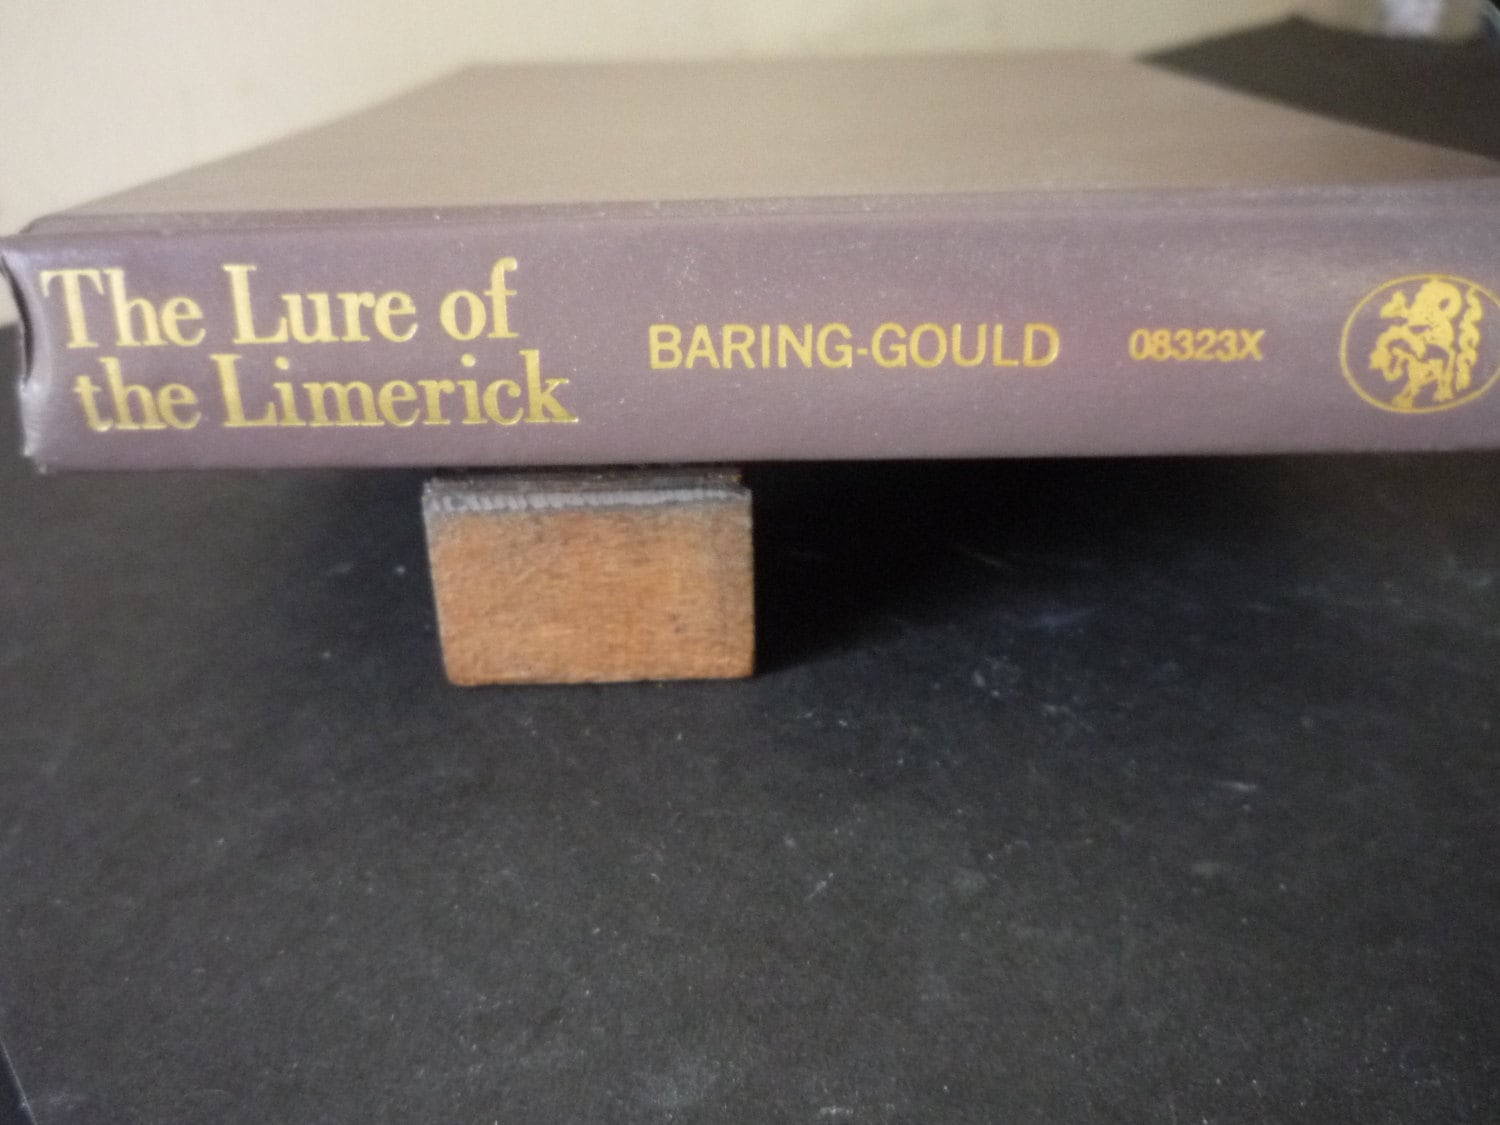 The Lure of the Limerick Baring-gould 1976 Edition MINT Condition